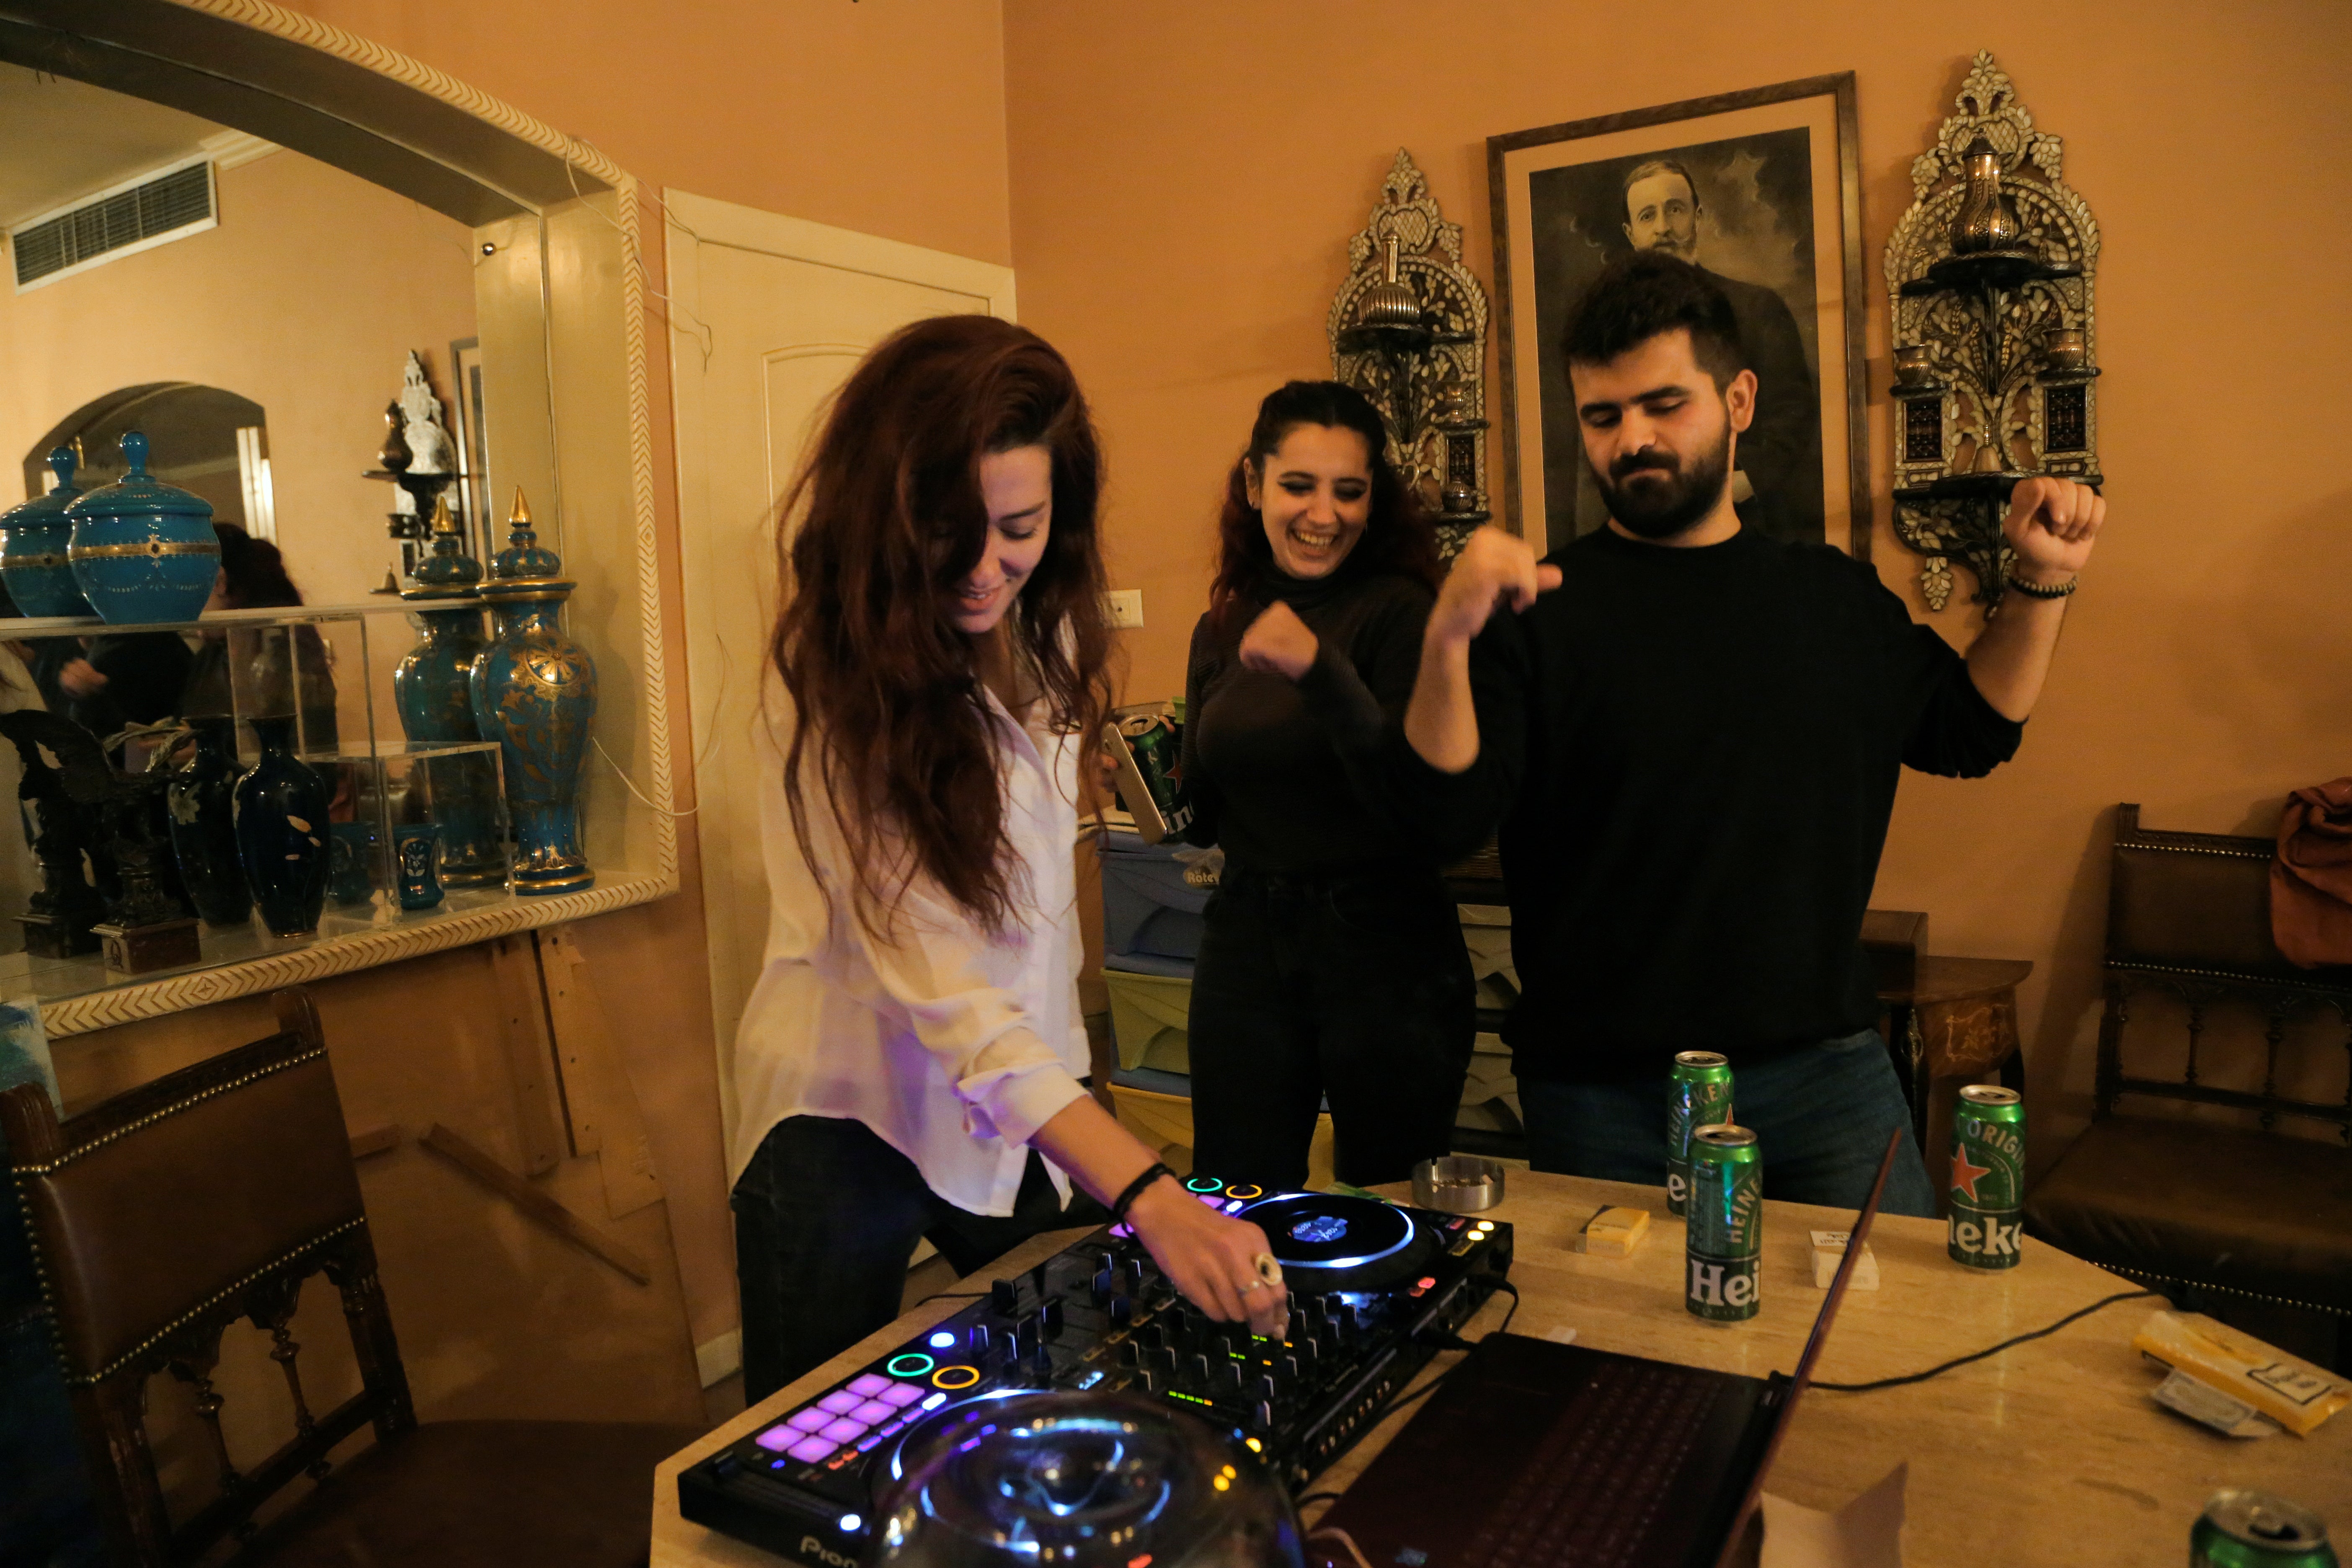 Yara plays techno music at an after party at her friend's house in Damascus